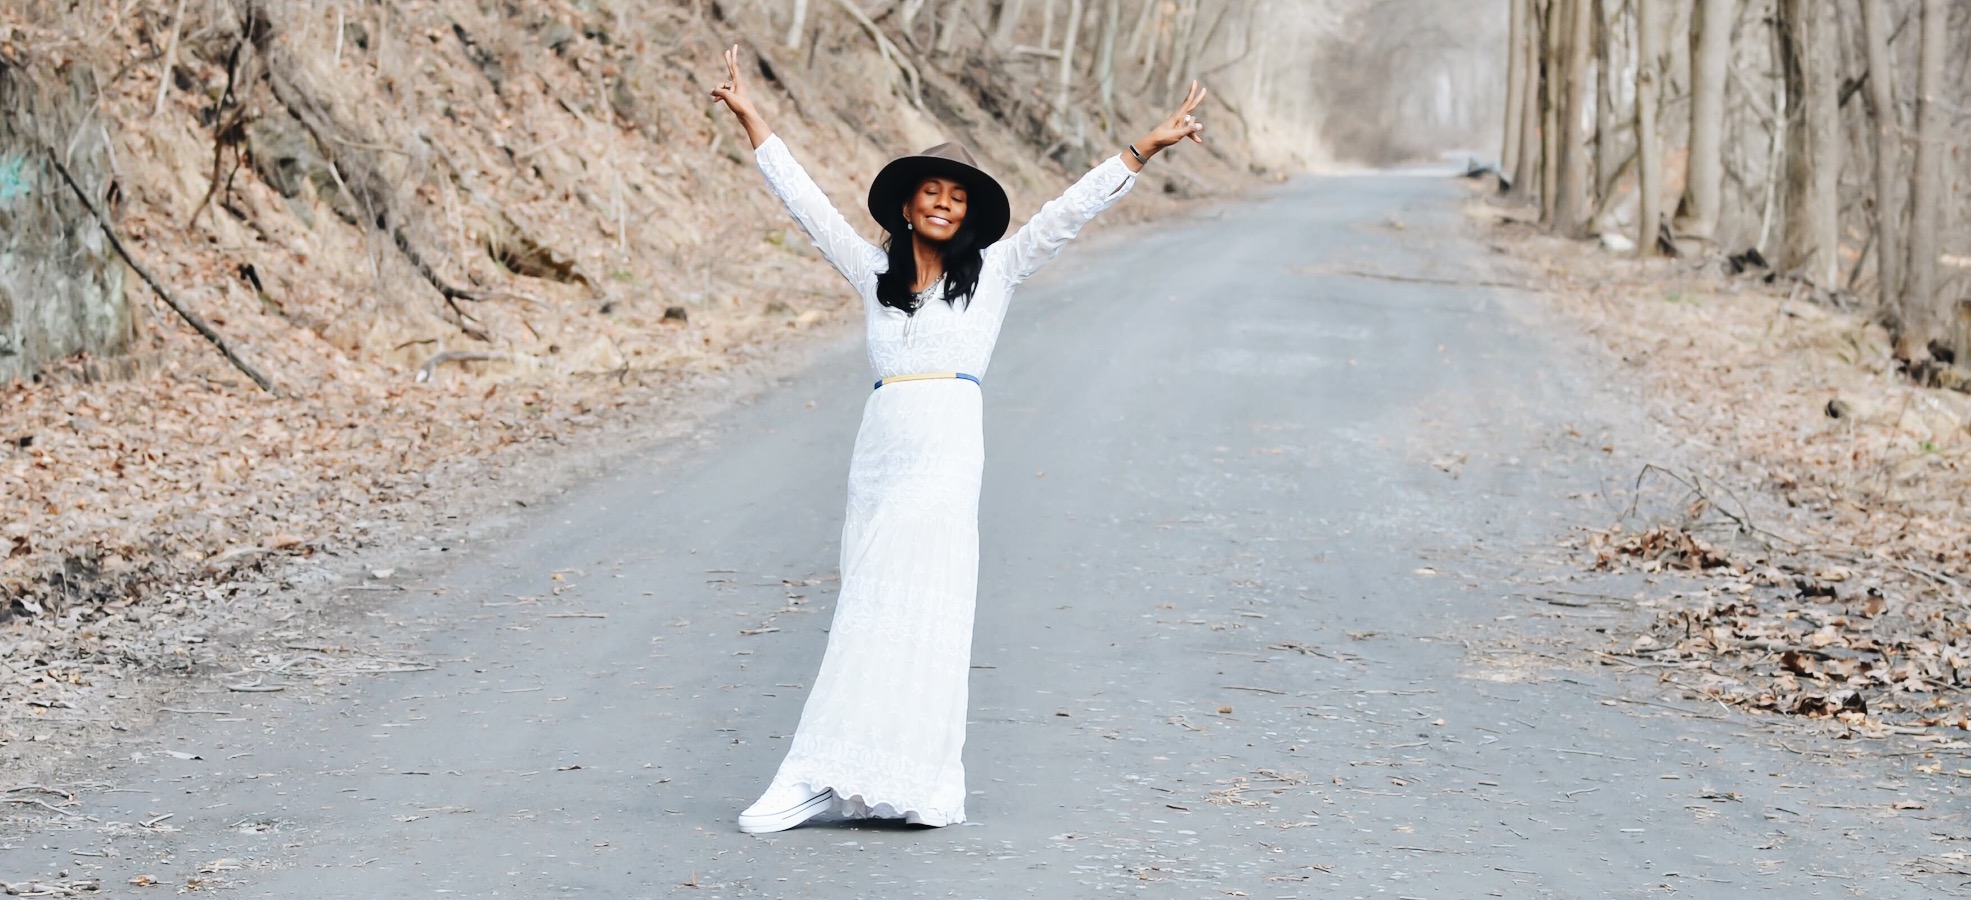 How Rediscovering My Purpose Saved My Life